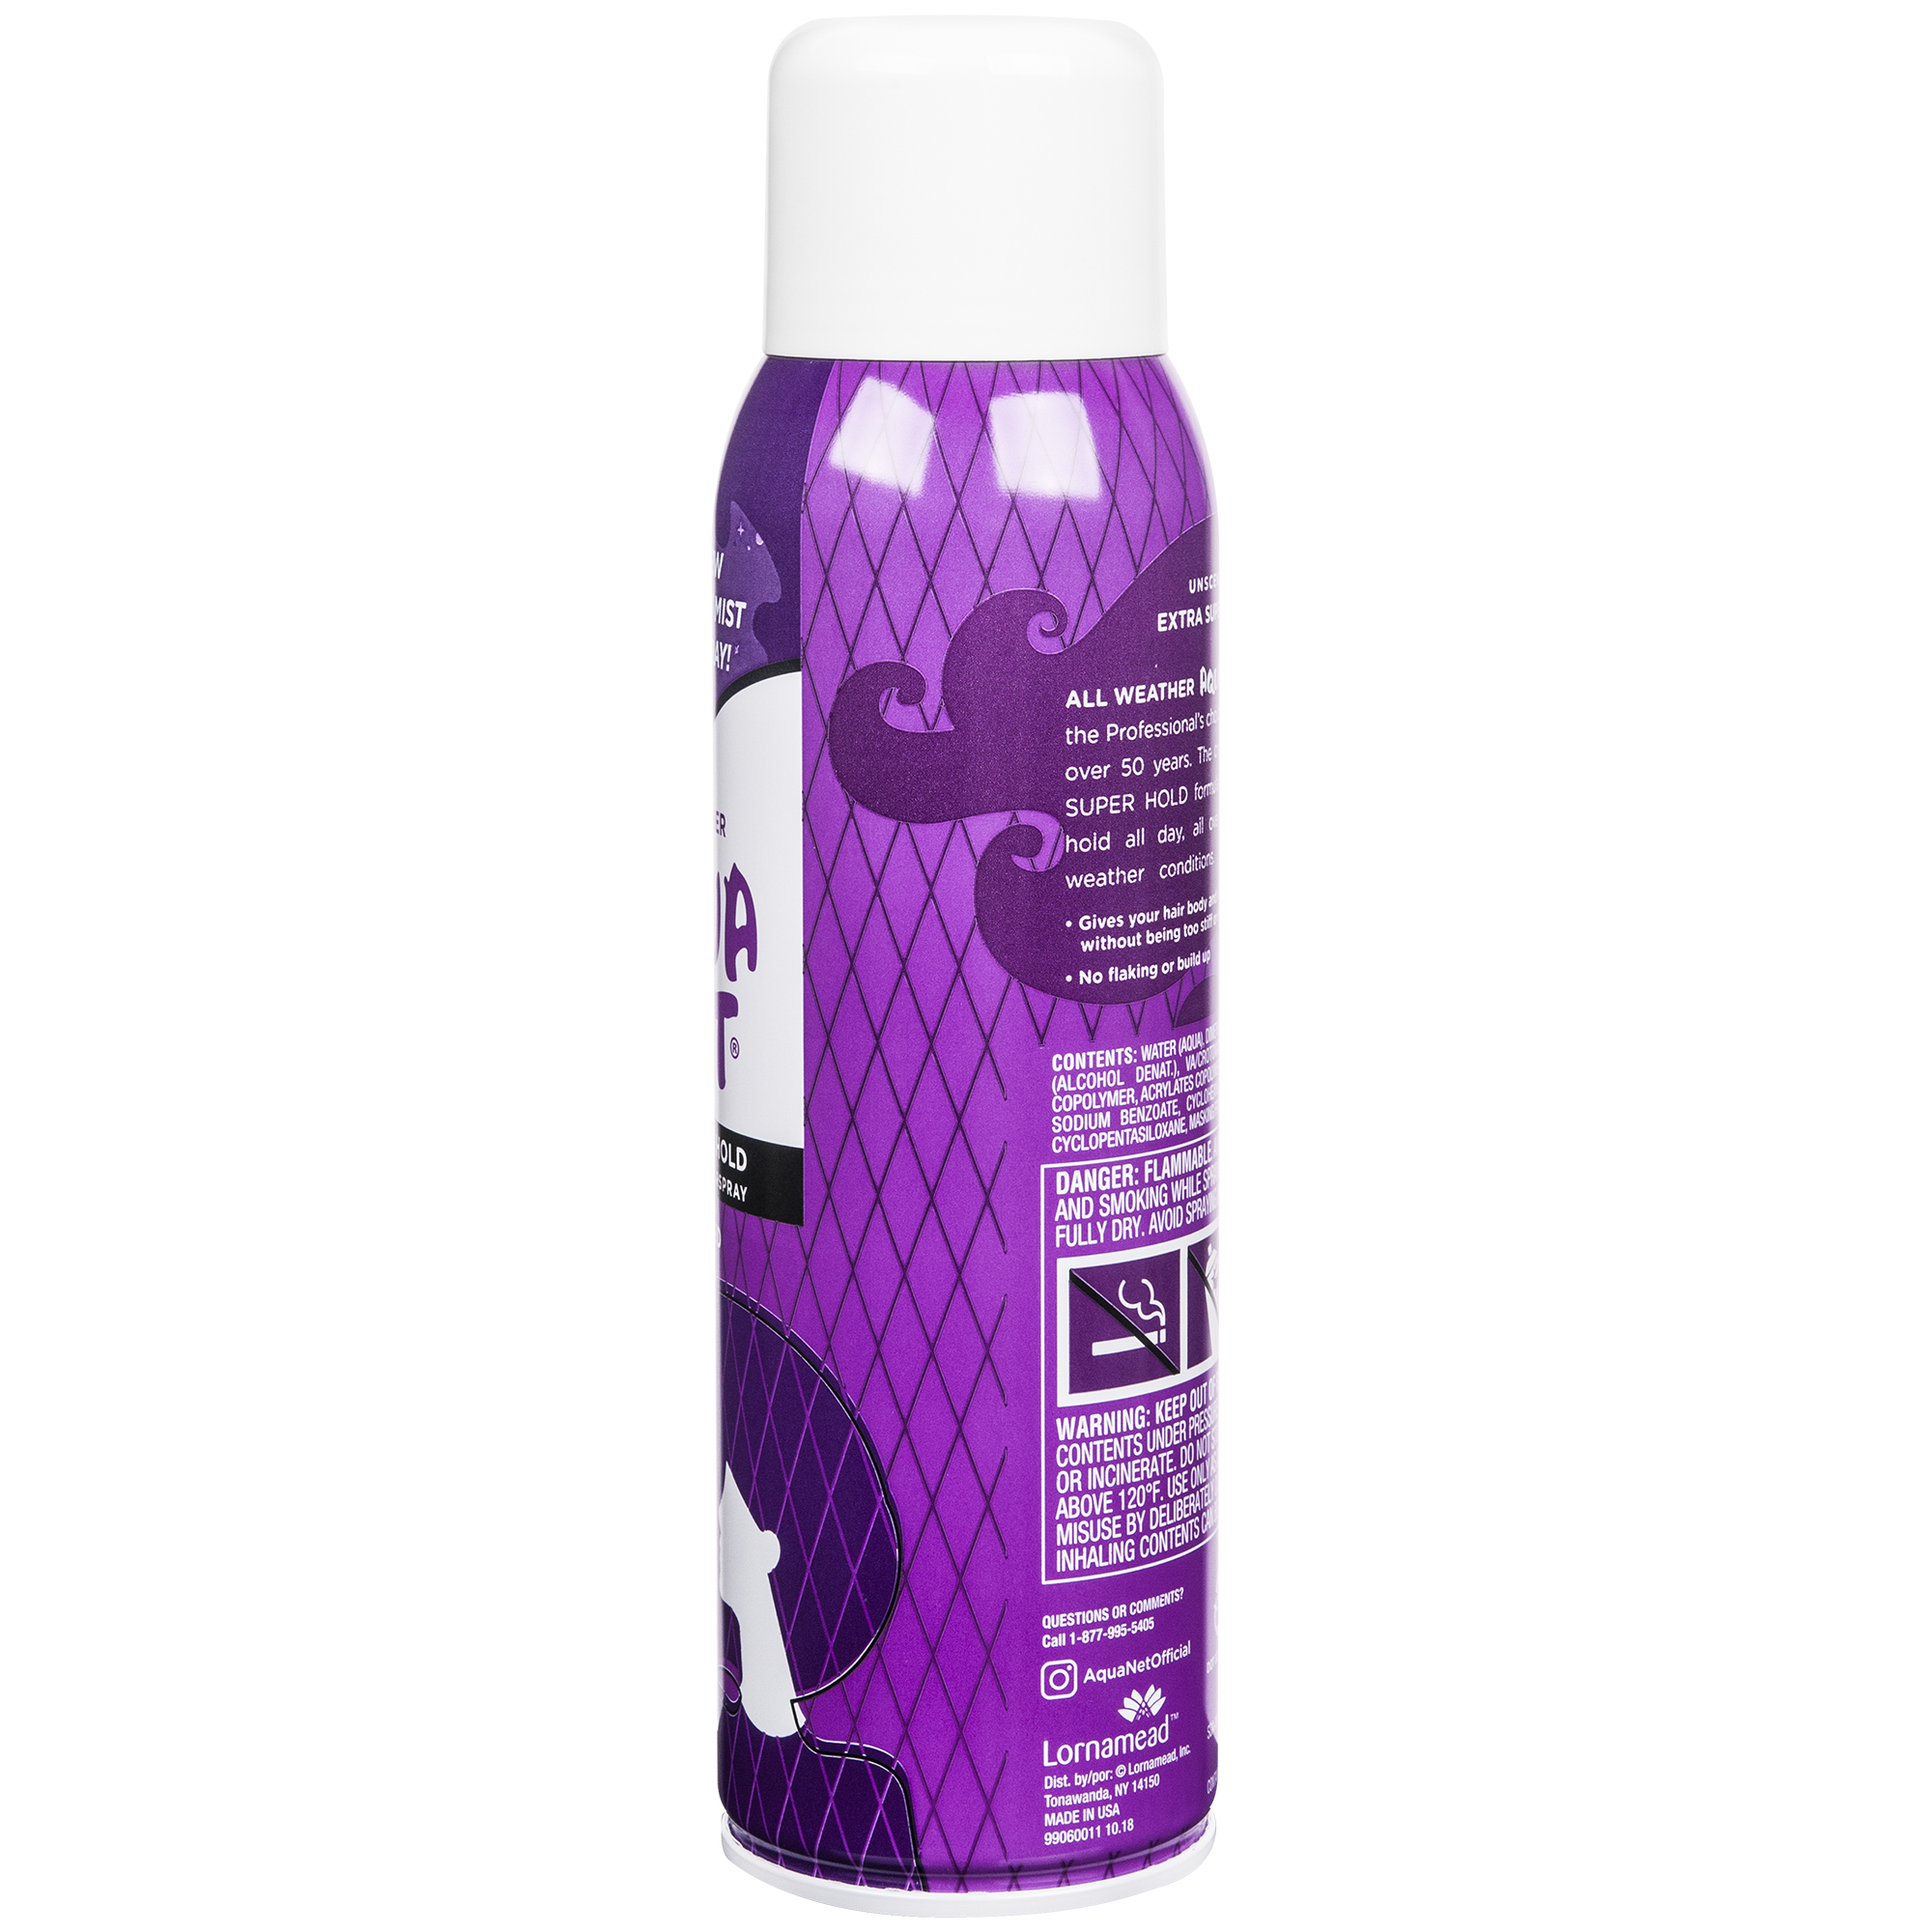 Aqua Net Hairspray, Extra Super Hold, Unscented, 11 oz Aerosol Can - image 4 of 8